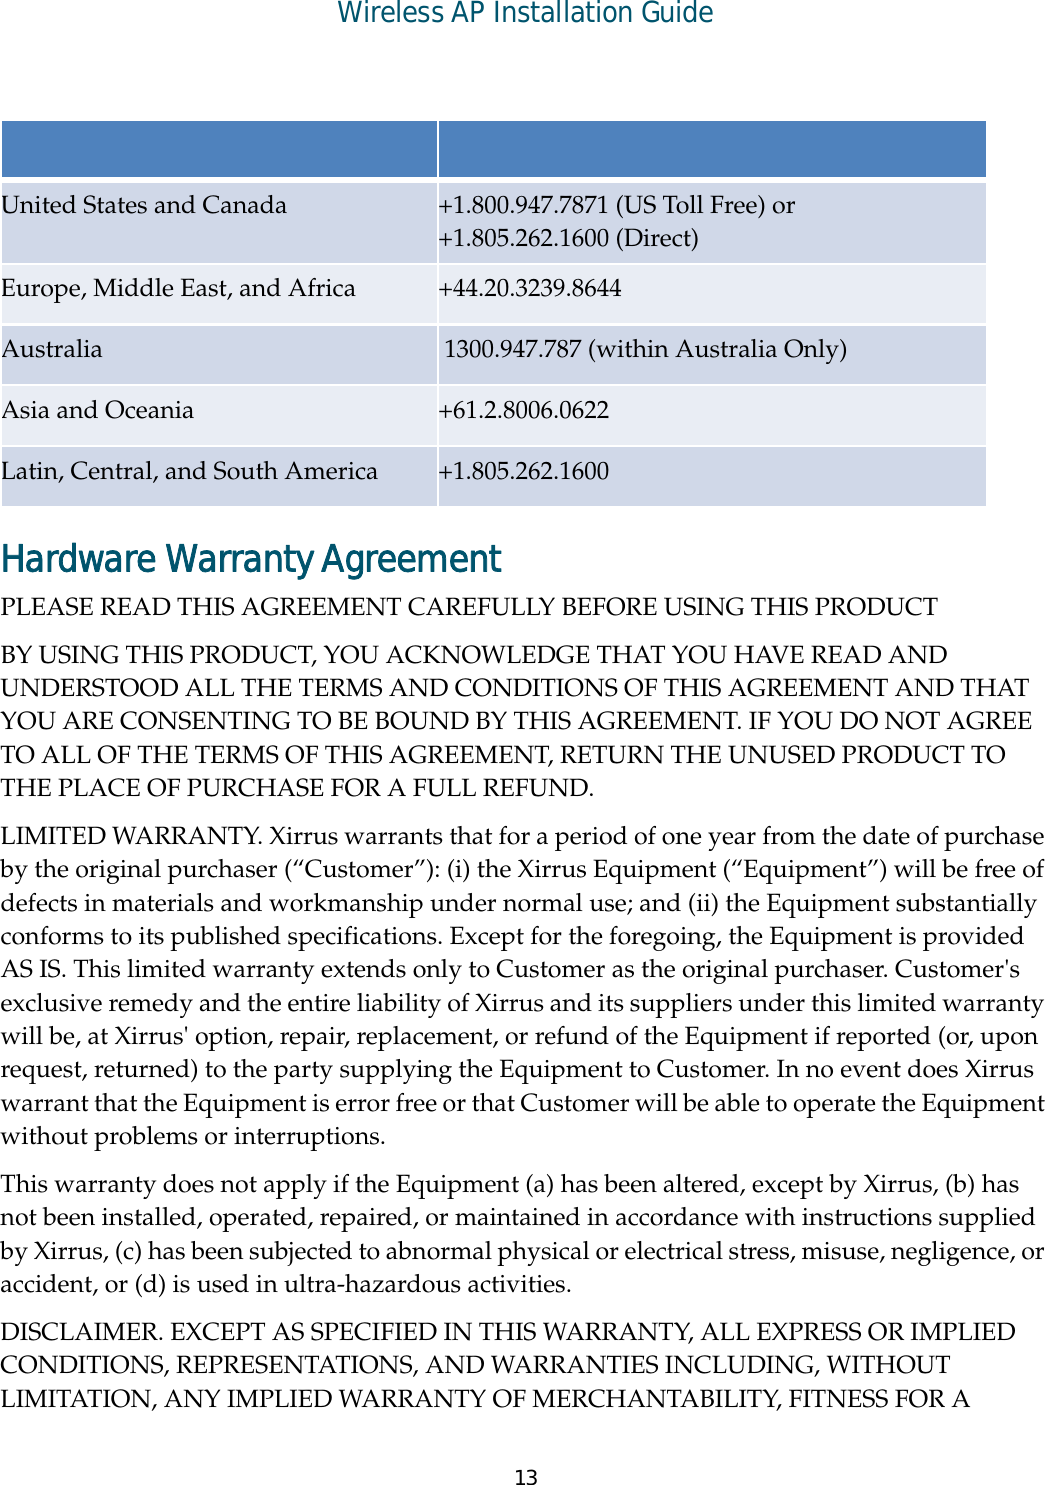 Wireless AP Installation Guide13Hardware Warranty Agreement PLEASE READ THIS AGREEMENT CAREFULLY BEFORE USING THIS PRODUCT BY USING THIS PRODUCT, YOU ACKNOWLEDGE THAT YOU HAVE READ AND UNDERSTOOD ALL THE TERMS AND CONDITIONS OF THIS AGREEMENT AND THAT YOU ARE CONSENTING TO BE BOUND BY THIS AGREEMENT. IF YOU DO NOT AGREE TO ALL OF THE TERMS OF THIS AGREEMENT, RETURN THE UNUSED PRODUCT TO THE PLACE OF PURCHASE FOR A FULL REFUND. LIMITED WARRANTY. Xirrus warrants that for a period of one year from the date of purchase by the original purchaser (“Customer”): (i) the Xirrus Equipment (“Equipment”) will be free of defects in materials and workmanship under normal use; and (ii) the Equipment substantially conforms to its published specifications. Except for the foregoing, the Equipment is provided AS IS. This limited warranty extends only to Customer as the original purchaser. Customer&apos;s exclusive remedy and the entire liability of Xirrus and its suppliers under this limited warranty will be, at Xirrus&apos; option, repair, replacement, or refund of the Equipment if reported (or, upon request, returned) to the party supplying the Equipment to Customer. In no event does Xirrus warrant that the Equipment is error free or that Customer will be able to operate the Equipment without problems or interruptions. This warranty does not apply if the Equipment (a) has been altered, except by Xirrus, (b) has not been installed, operated, repaired, or maintained in accordance with instructions supplied by Xirrus, (c) has been subjected to abnormal physical or electrical stress, misuse, negligence, or accident, or (d) is used in ultra-hazardous activities. DISCLAIMER. EXCEPT AS SPECIFIED IN THIS WARRANTY, ALL EXPRESS OR IMPLIED CONDITIONS, REPRESENTATIONS, AND WARRANTIES INCLUDING, WITHOUT LIMITATION, ANY IMPLIED WARRANTY OF MERCHANTABILITY, FITNESS FOR A United States and Canada  +1.800.947.7871 (US Toll Free) or +1.805.262.1600 (Direct) Europe, Middle East, and Africa  +44.20.3239.8644 Australia   1300.947.787 (within Australia Only)Asia and Oceania  +61.2.8006.0622 Latin, Central, and South America  +1.805.262.1600 